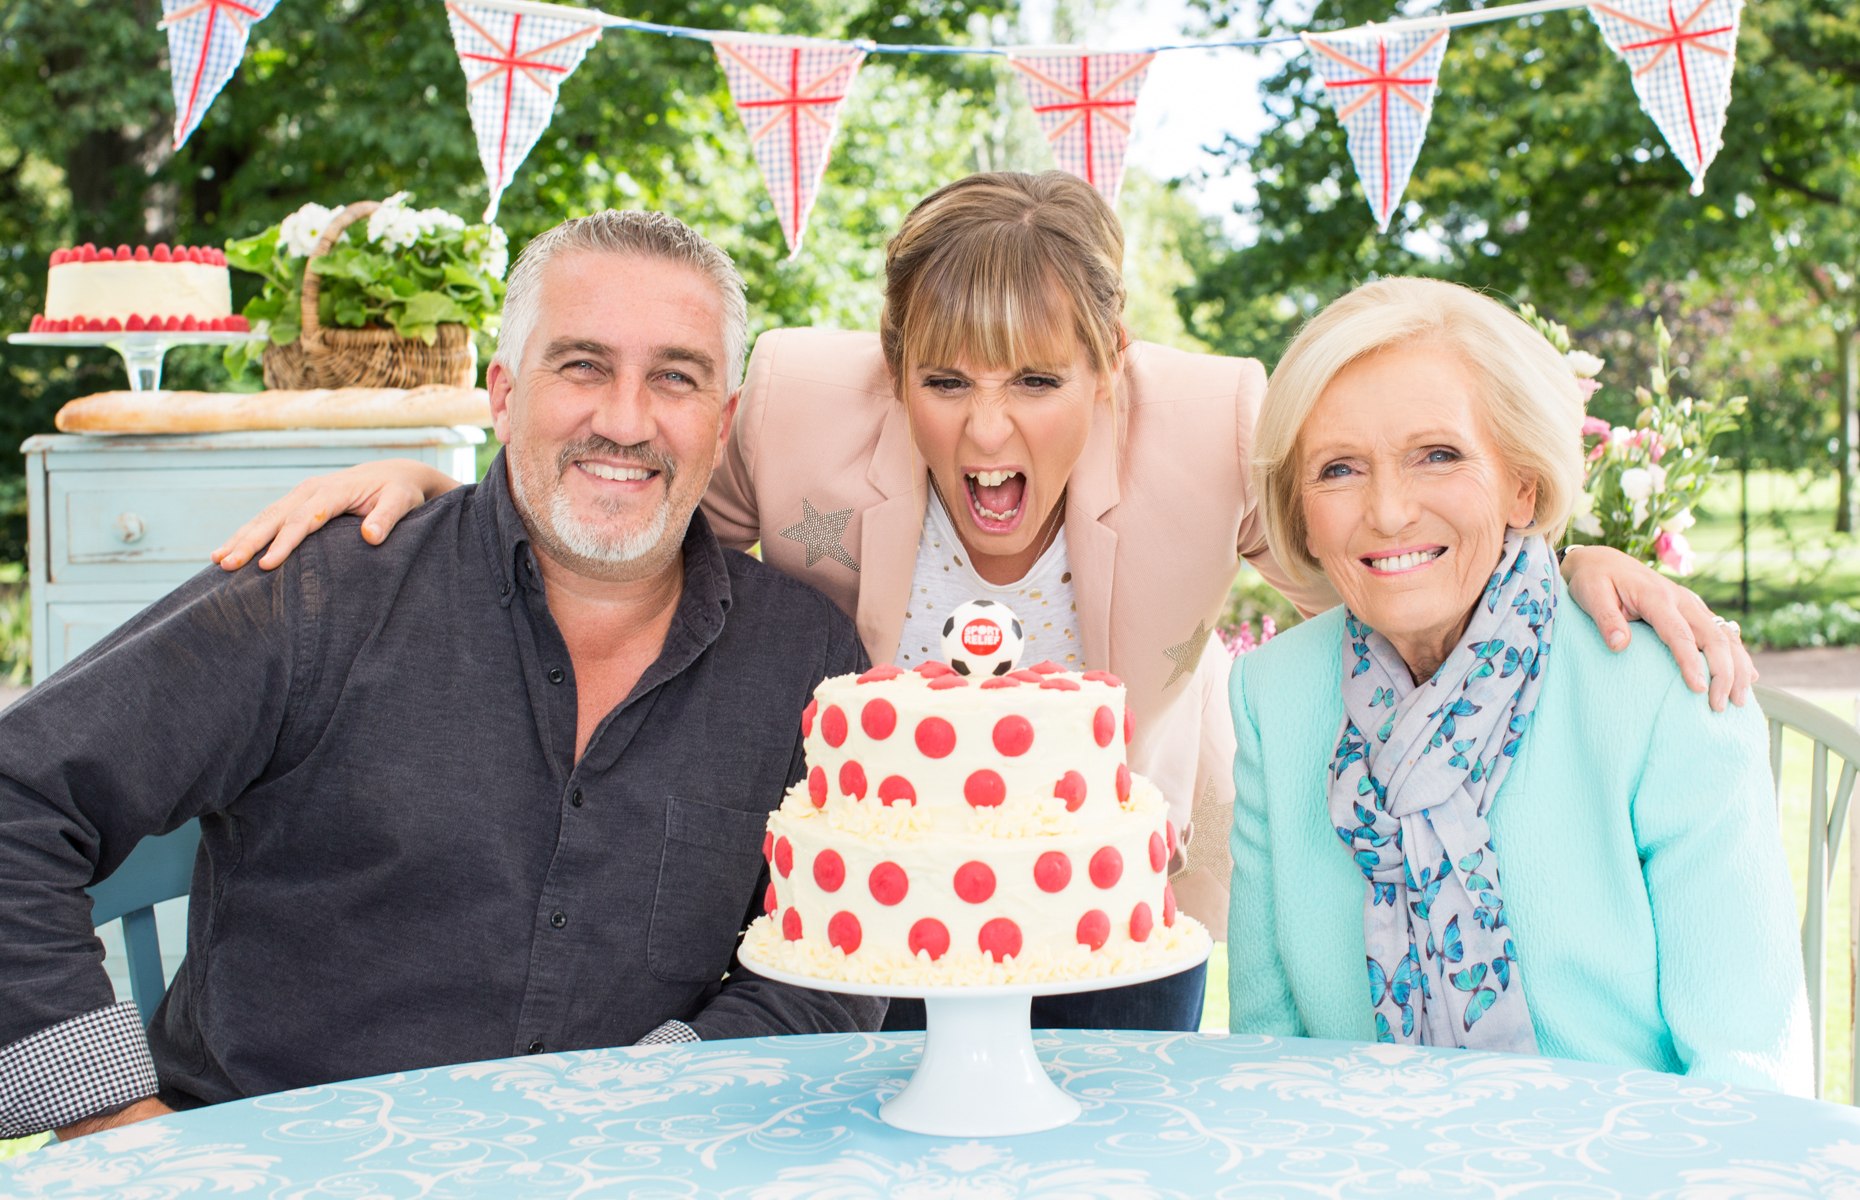 Great British Bake Off judges Mary Berry and Paul Hollywood with Mel Giedroyc in 2016 (Image: Victoria Dawe/Comic Relief/Getty Images)